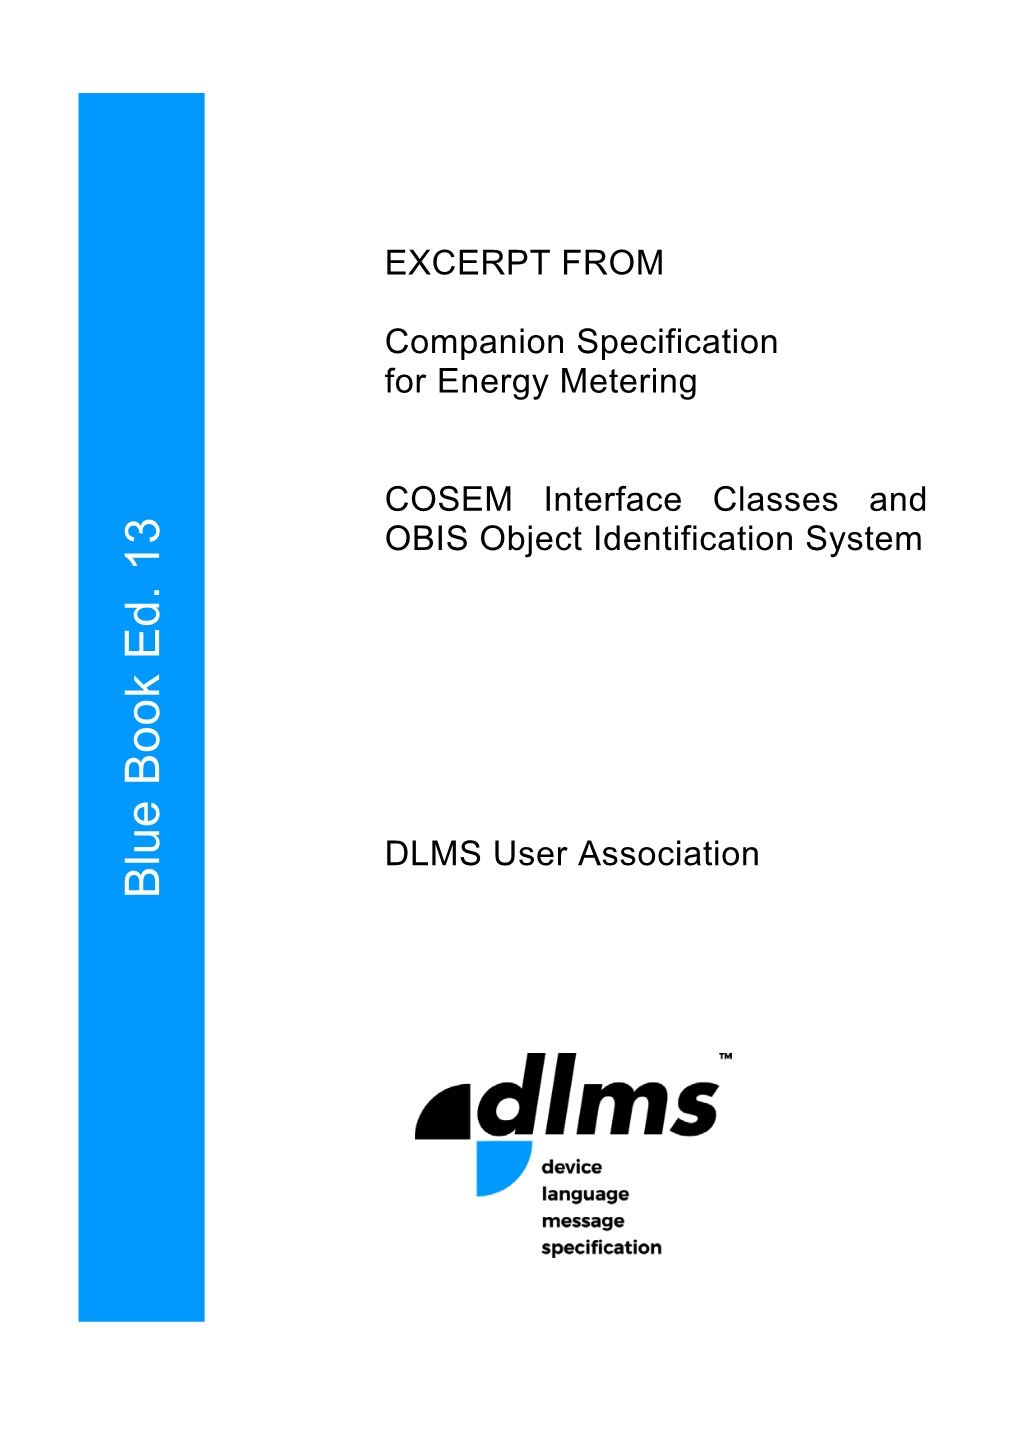 COSEM Interface Classes and OBIS Object Identification System